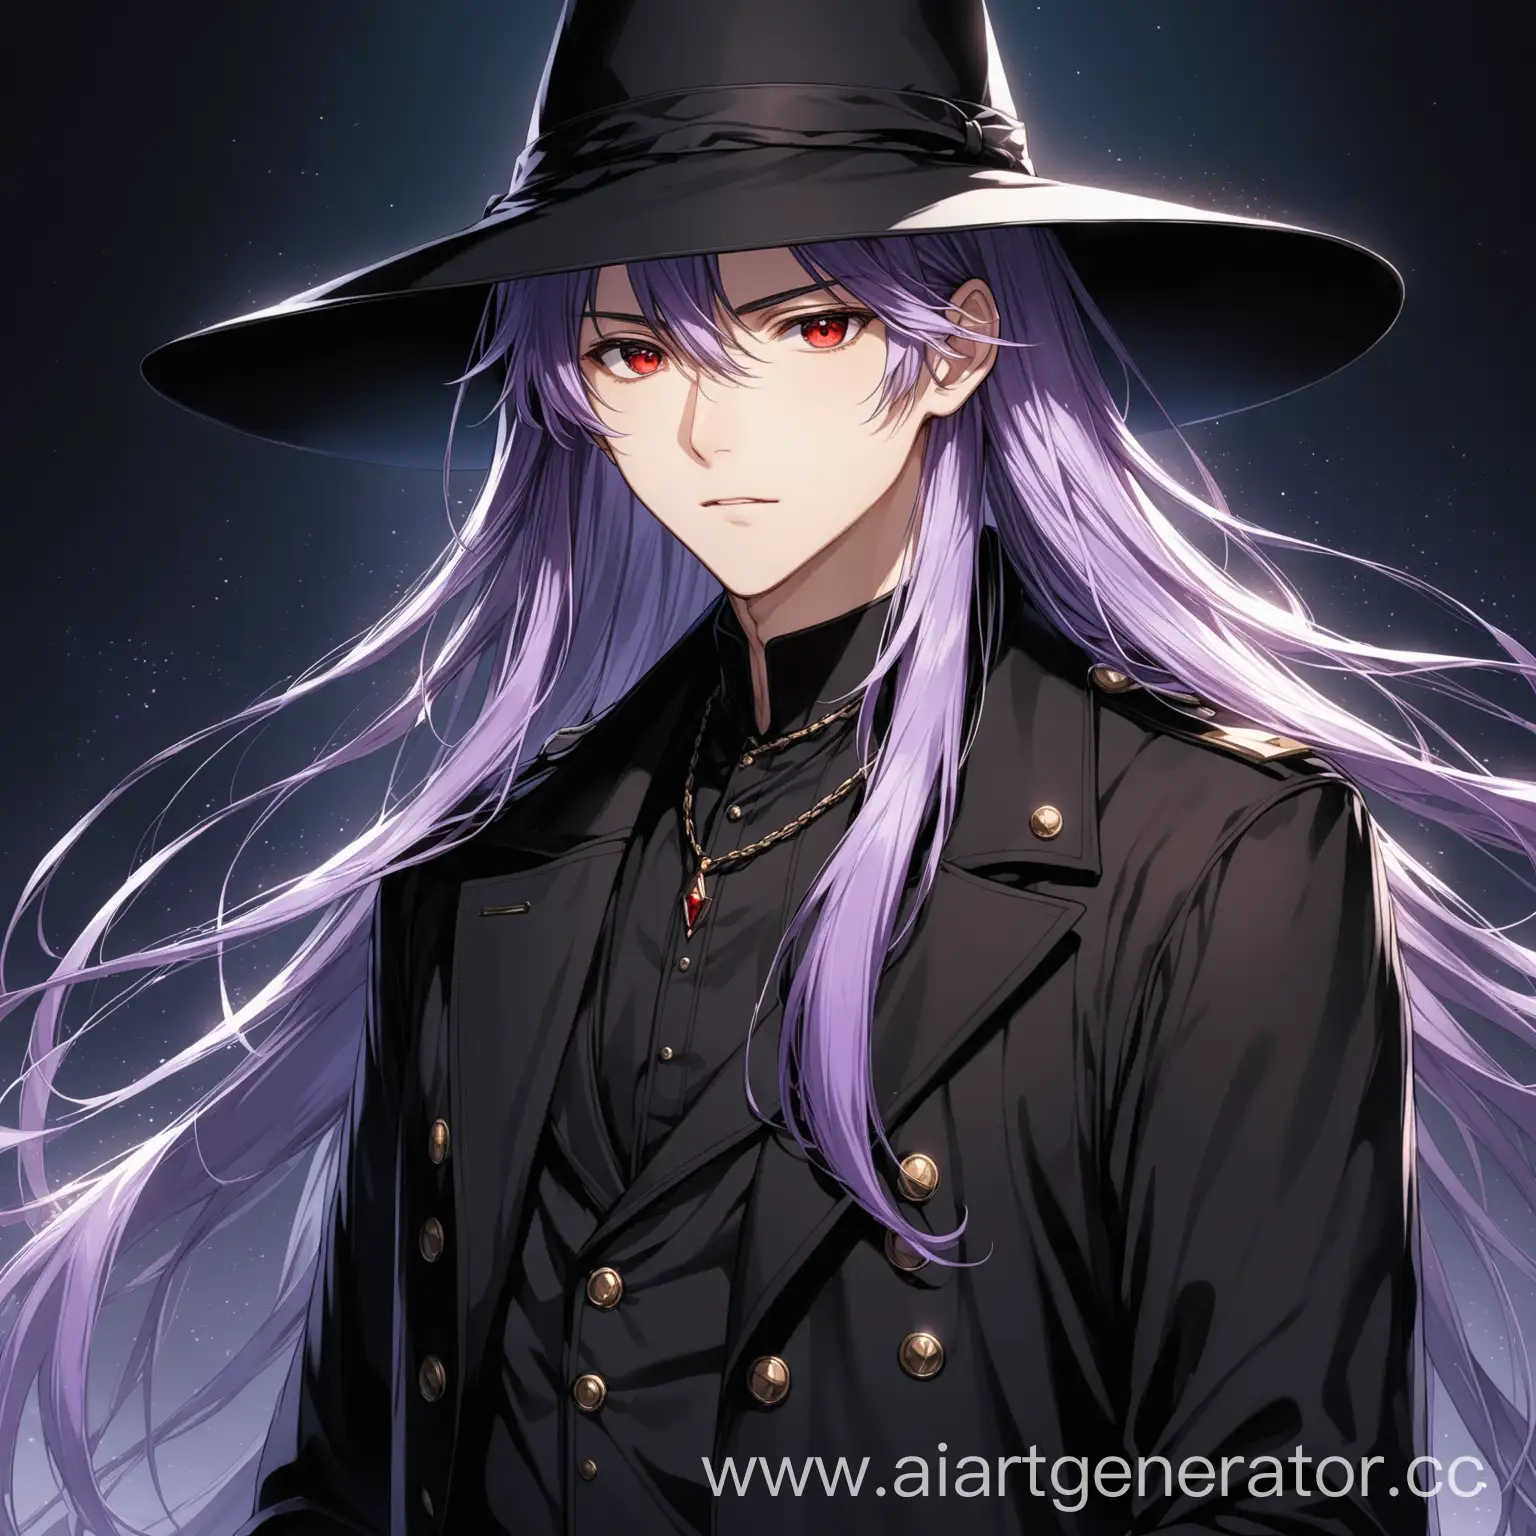 Mysterious-Anime-Character-with-Lavender-Hair-and-Red-Eyes-in-Black-Coat-and-Hat